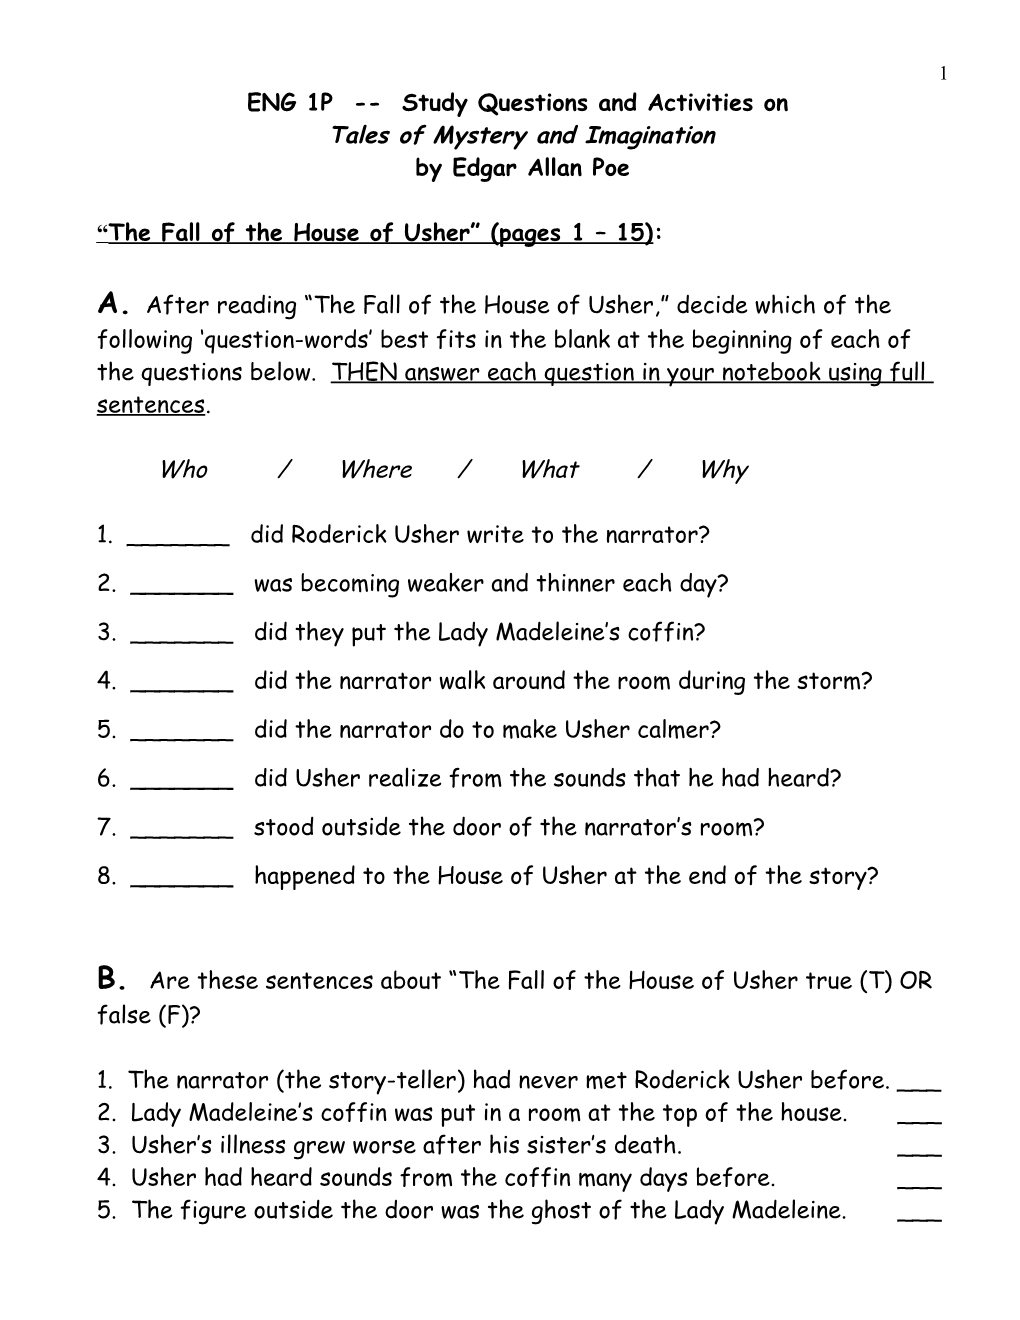 ENG 1P Study Questions and Activities On